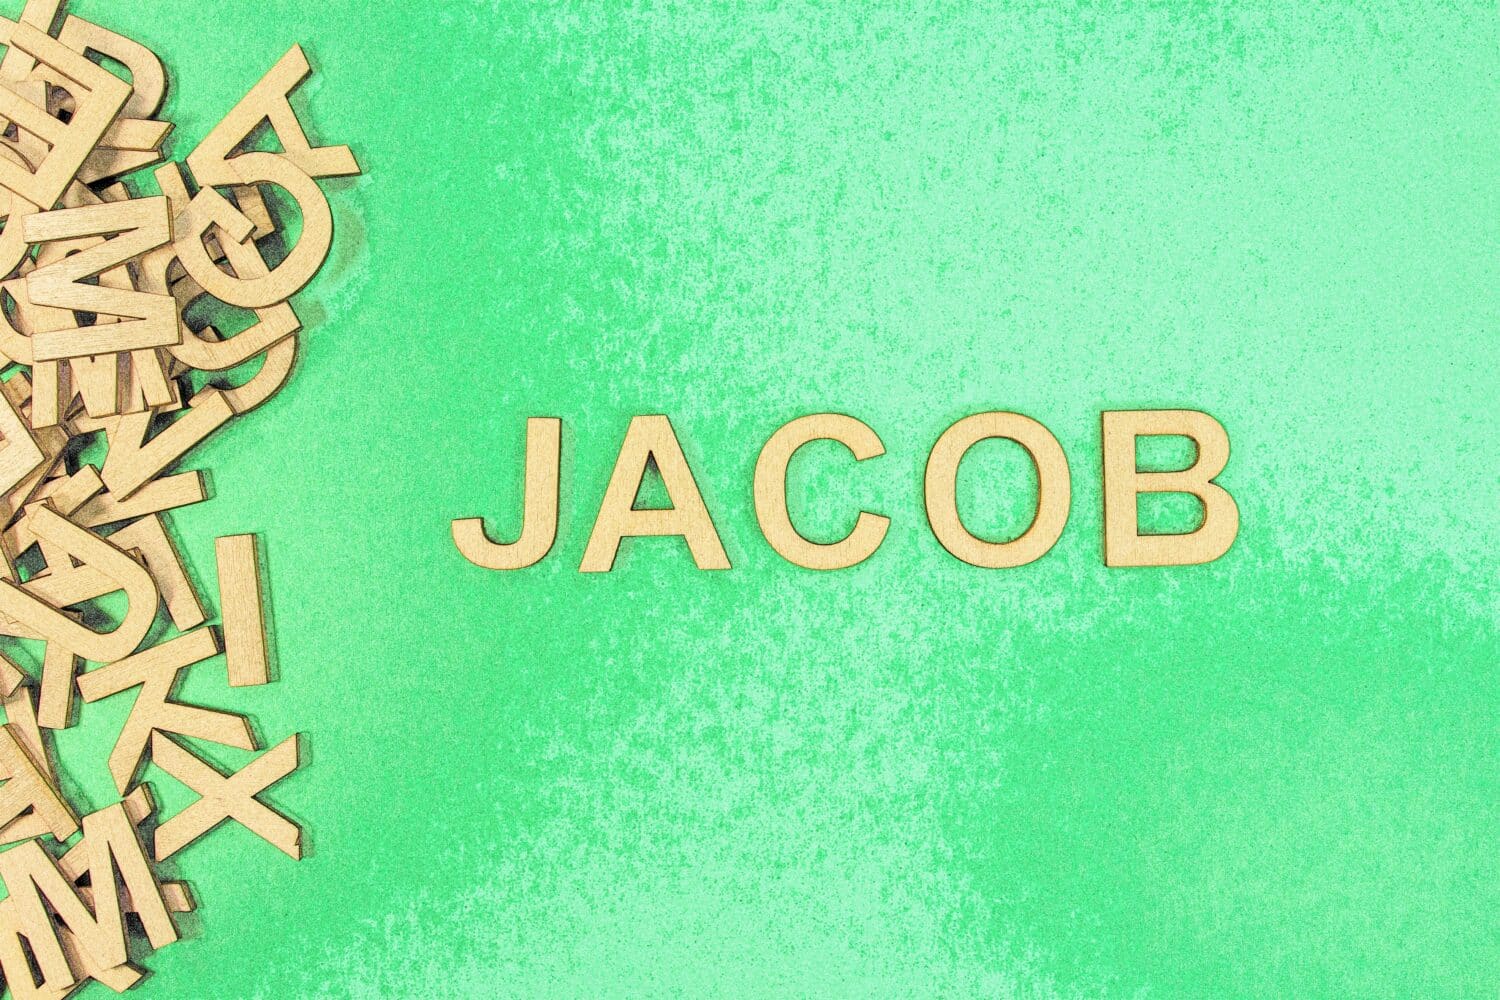 Popular and modern baby boy fashion name JACOB in wooden English language capital letters spilling from a pile of letters on a green background pencil sketch